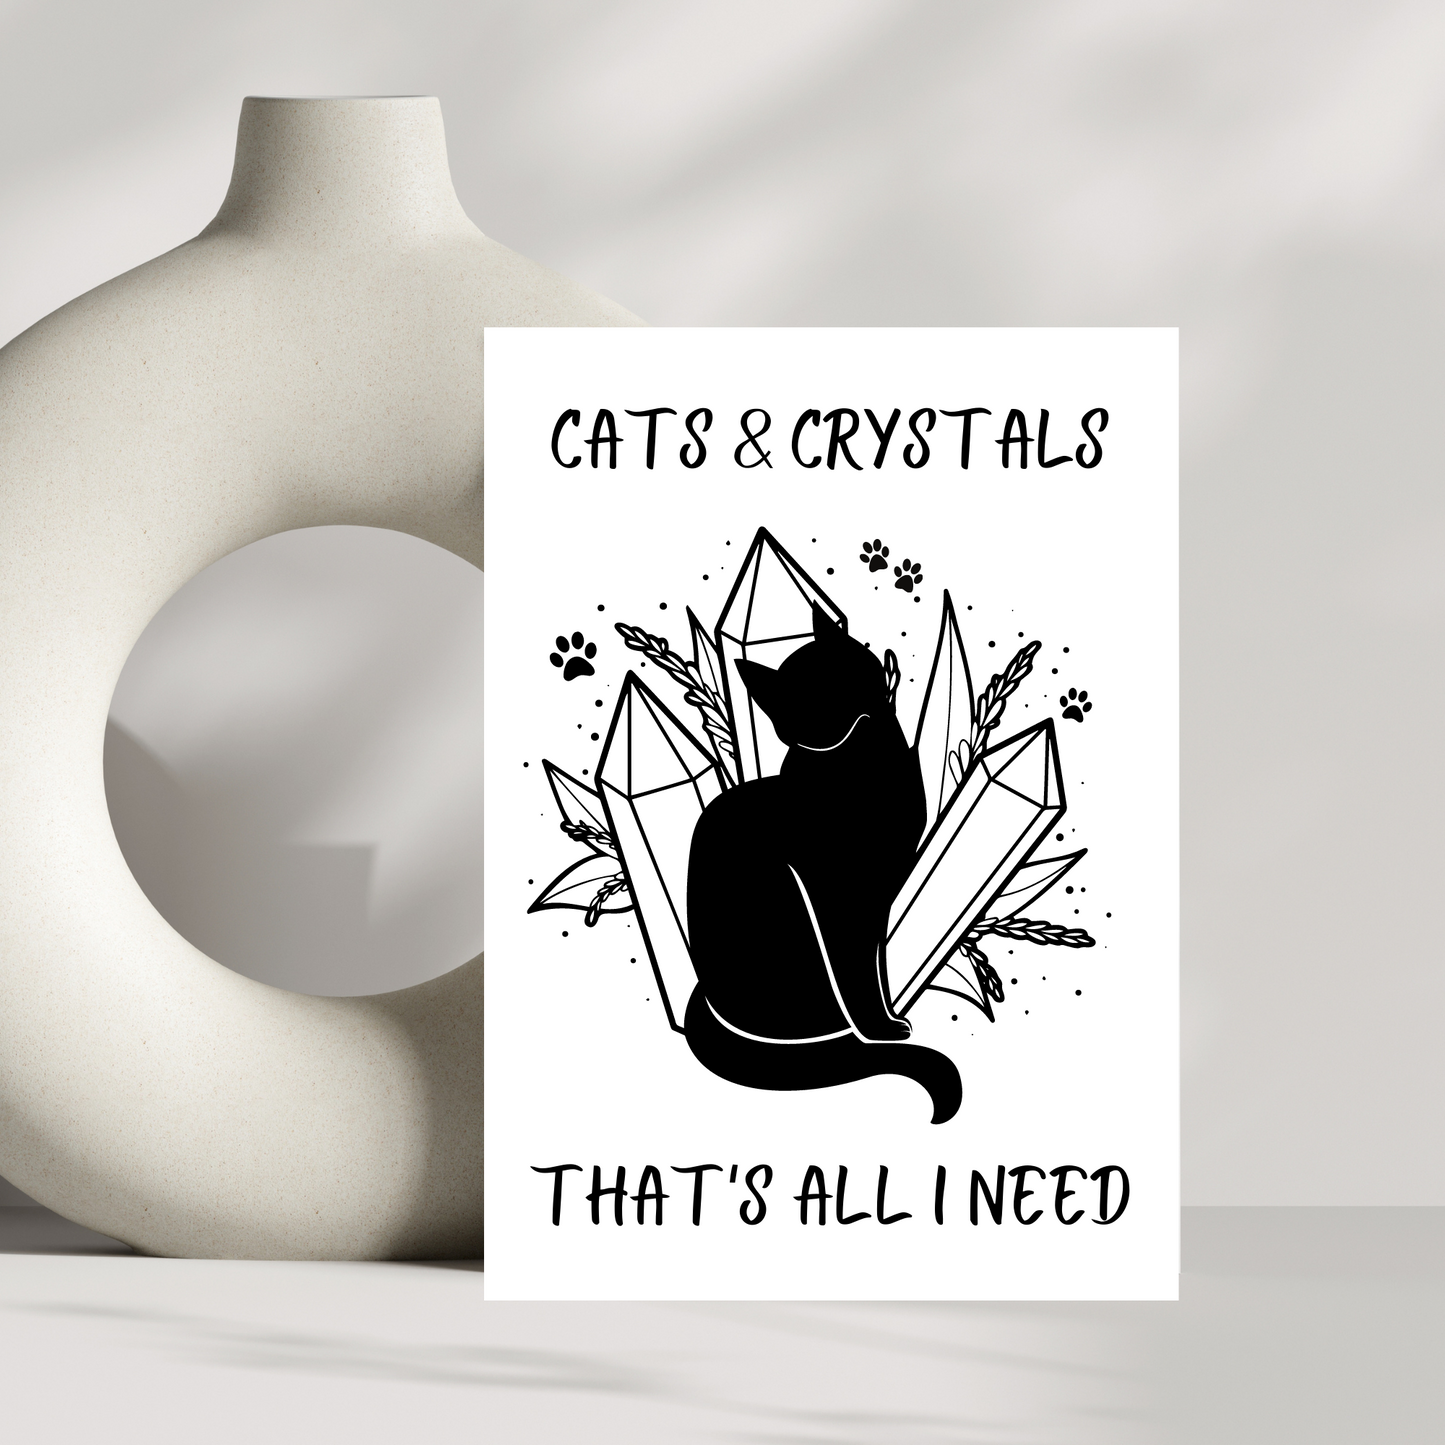 Cats & Crystals that's all I need greetings card